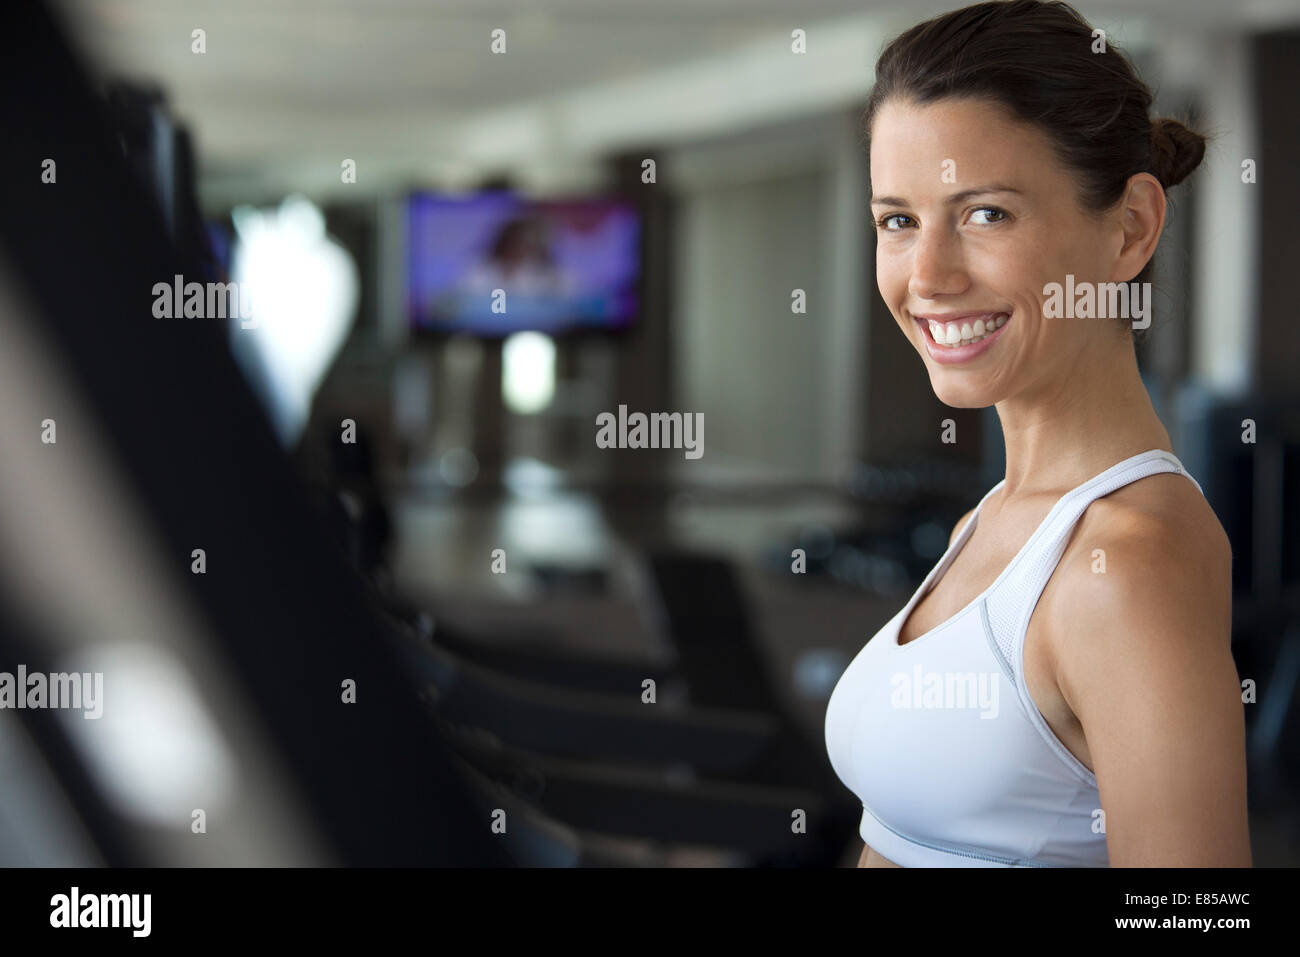 Woman exercising in health club, portrait Stock Photo